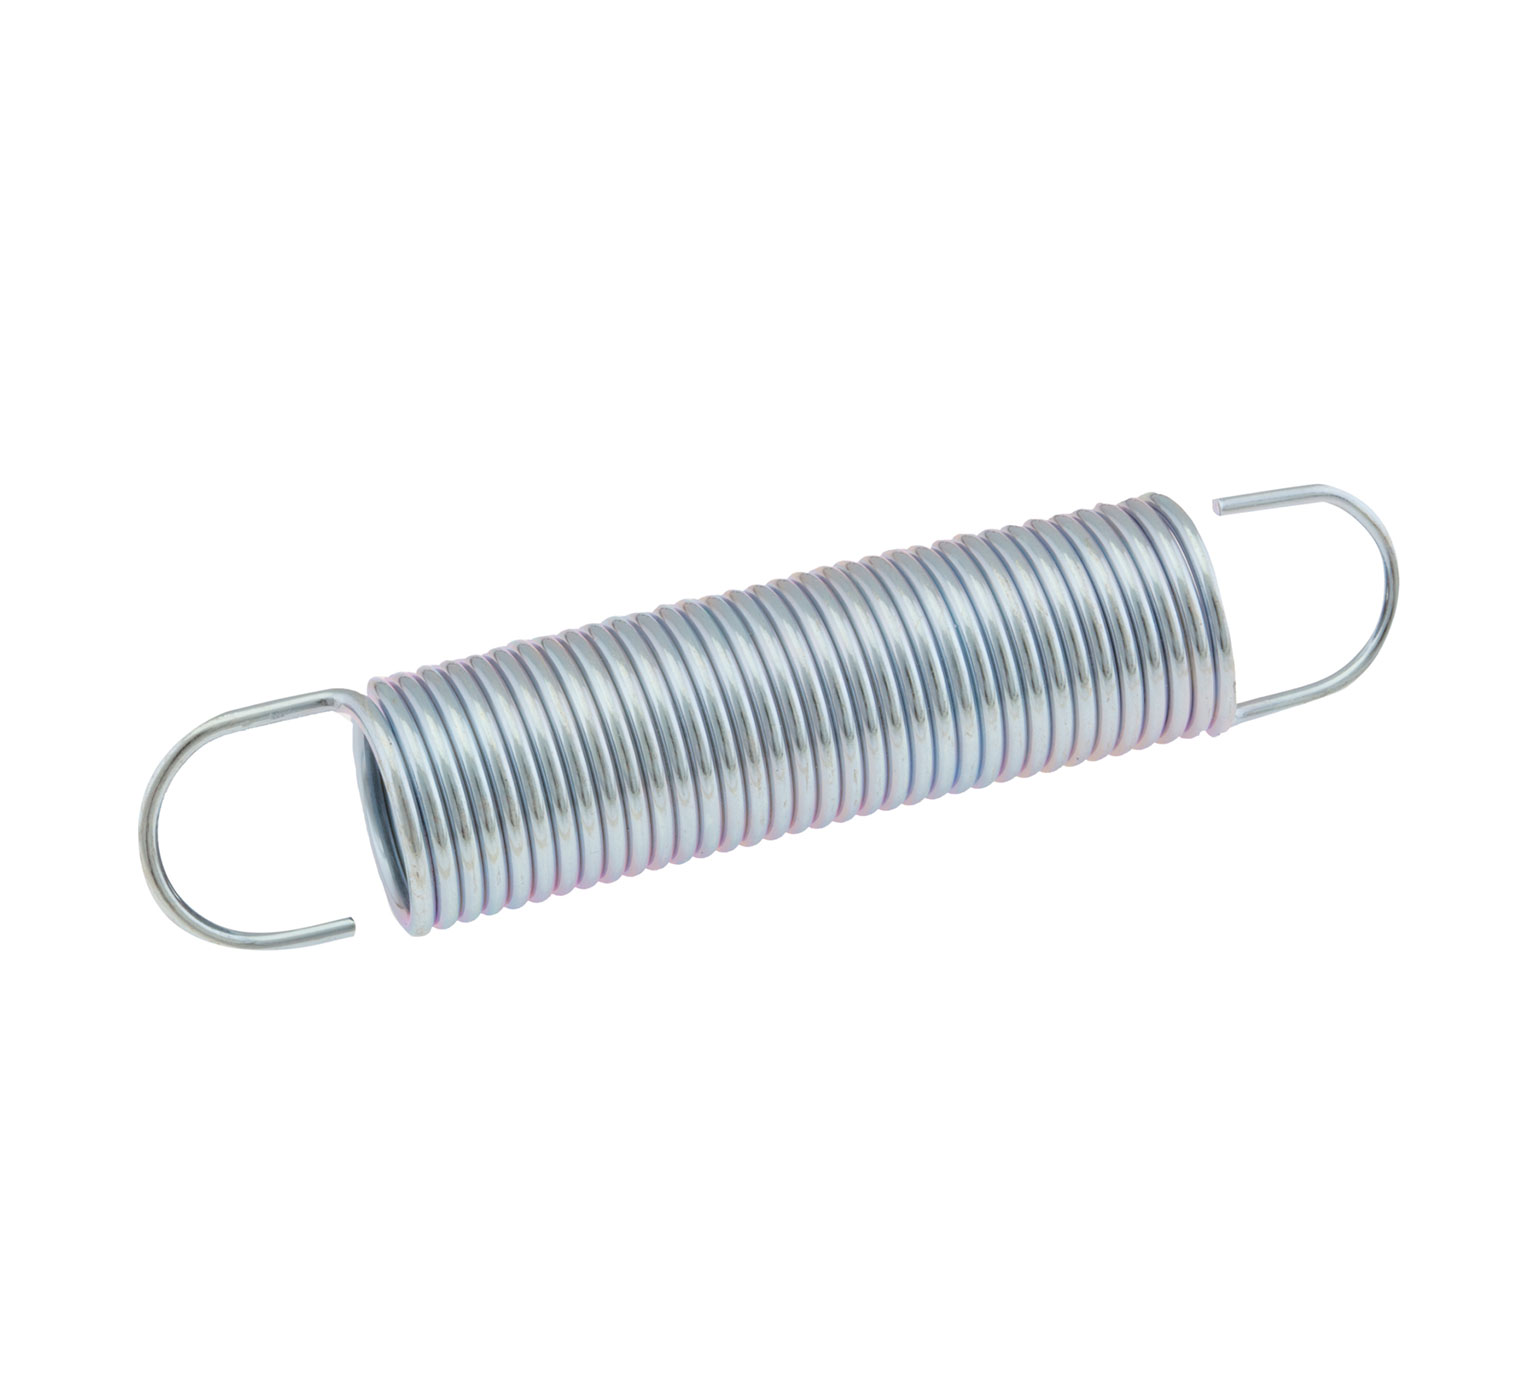 140431 Music Wire Extension Spring - 1 x 5 in alt 1